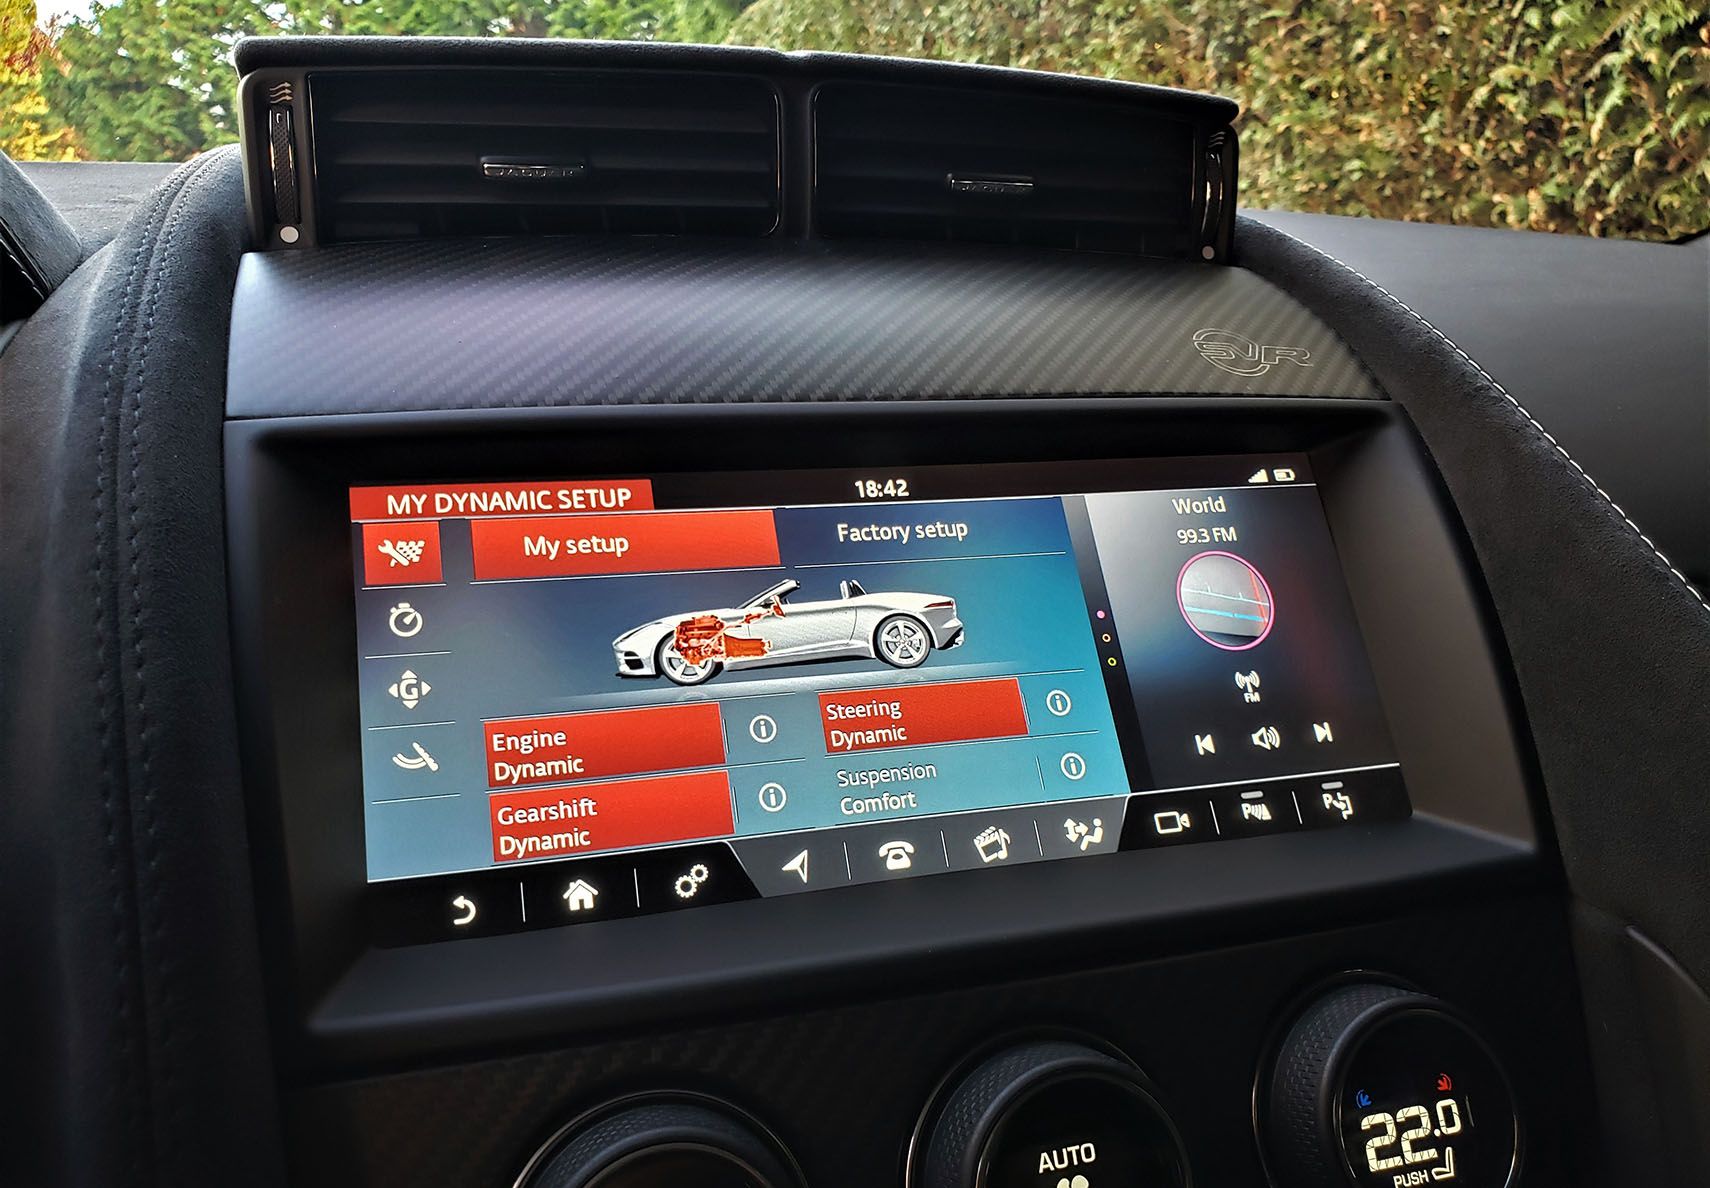 Jaguar's main touchscreen is filled with useful features.